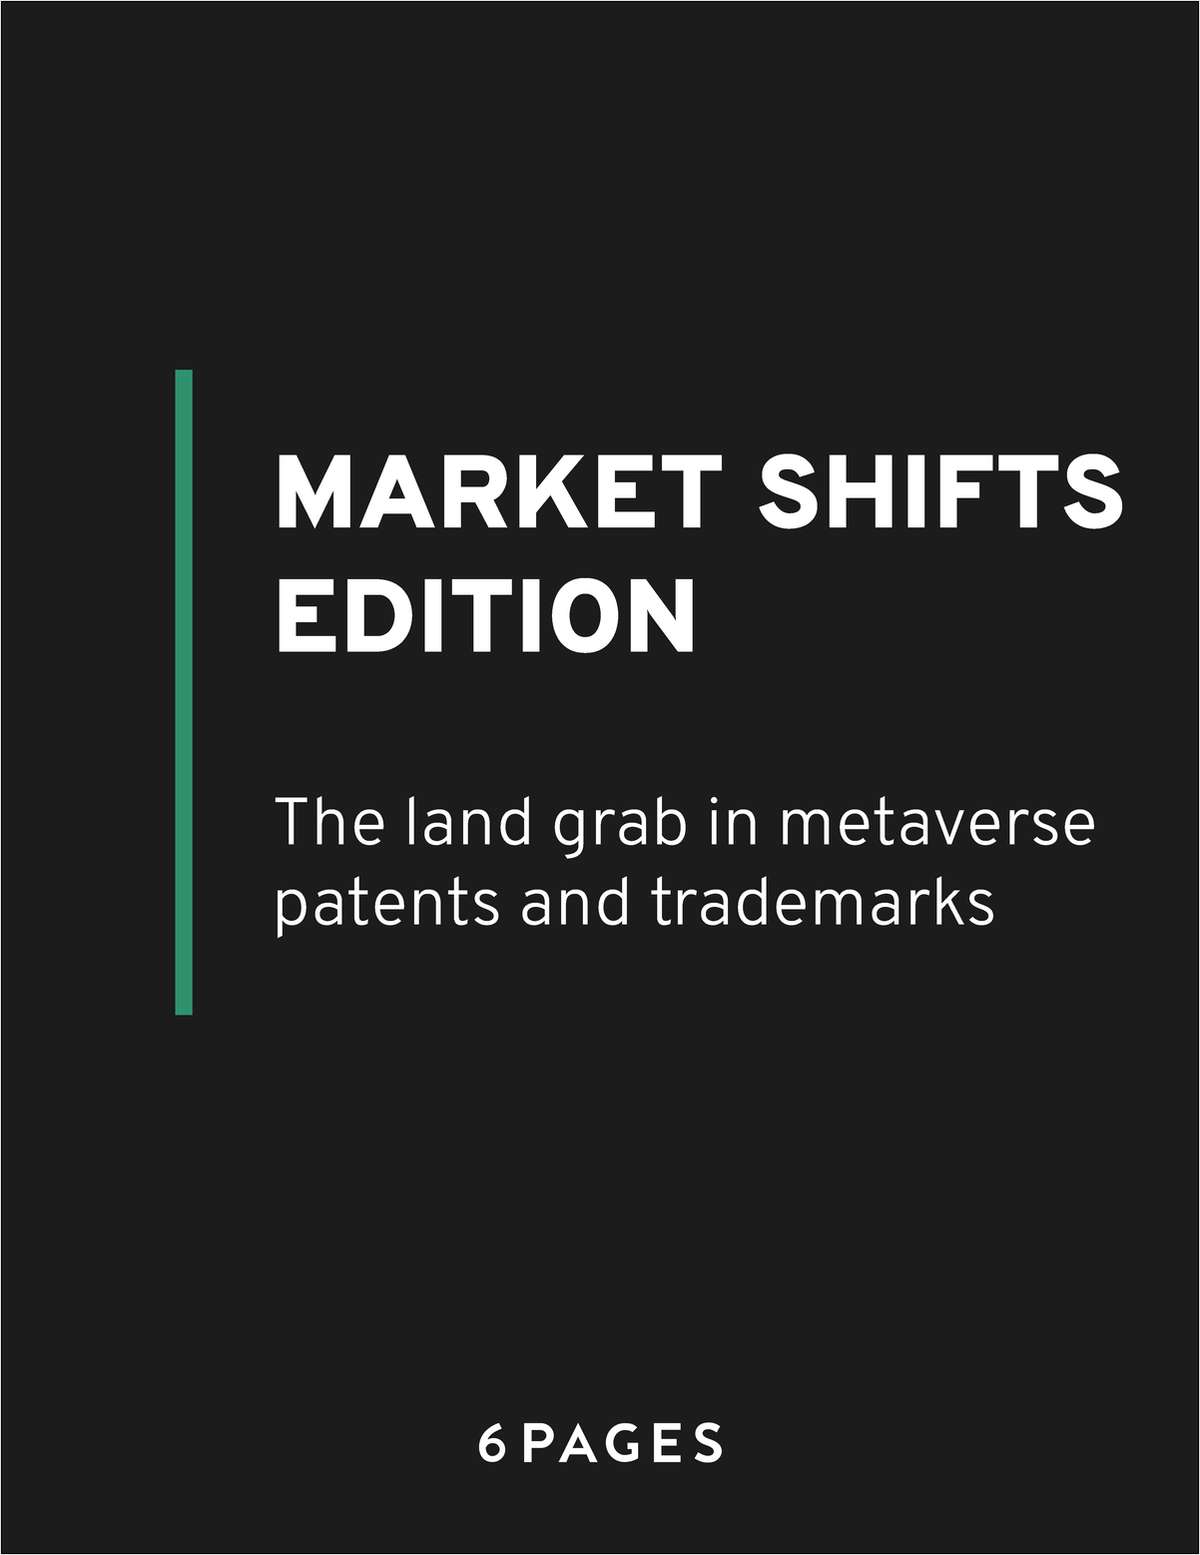 Market Shifts Edition: The land grab in metaverse patents and trademarks